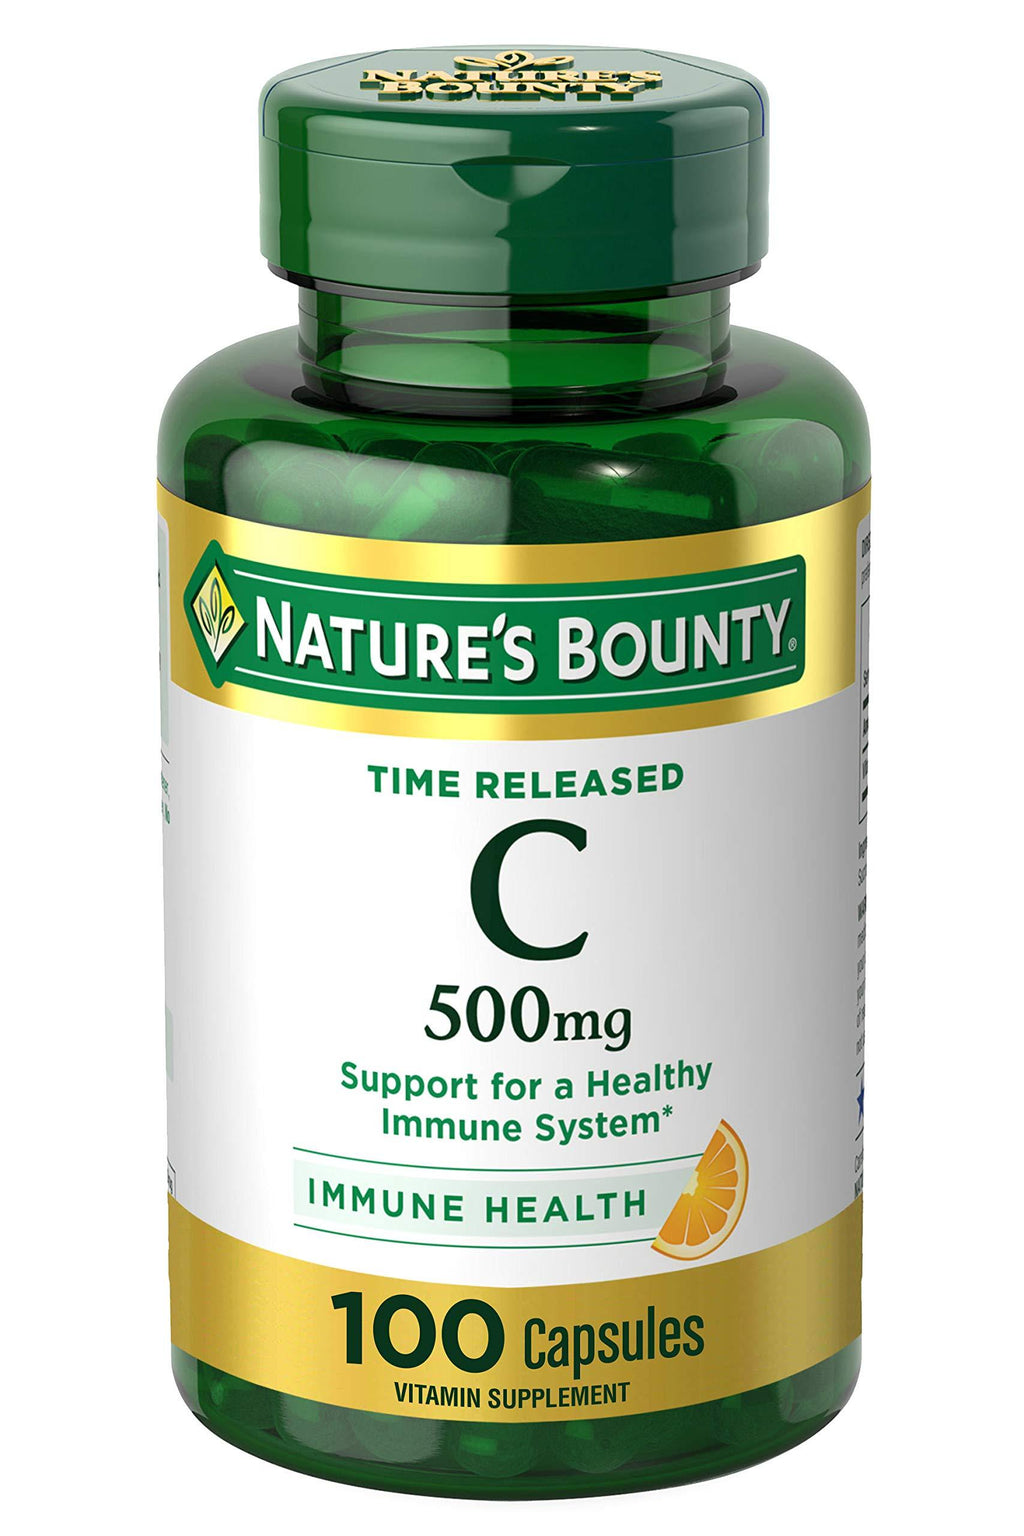 Nature's Bounty Vitamin C by Nature’s Bounty for immune support. Vitamin C is a leading leading vitamin for immune support.* 500mg, Capsules White 500 mg, 100 Count (Pack of 1) - BeesActive Australia